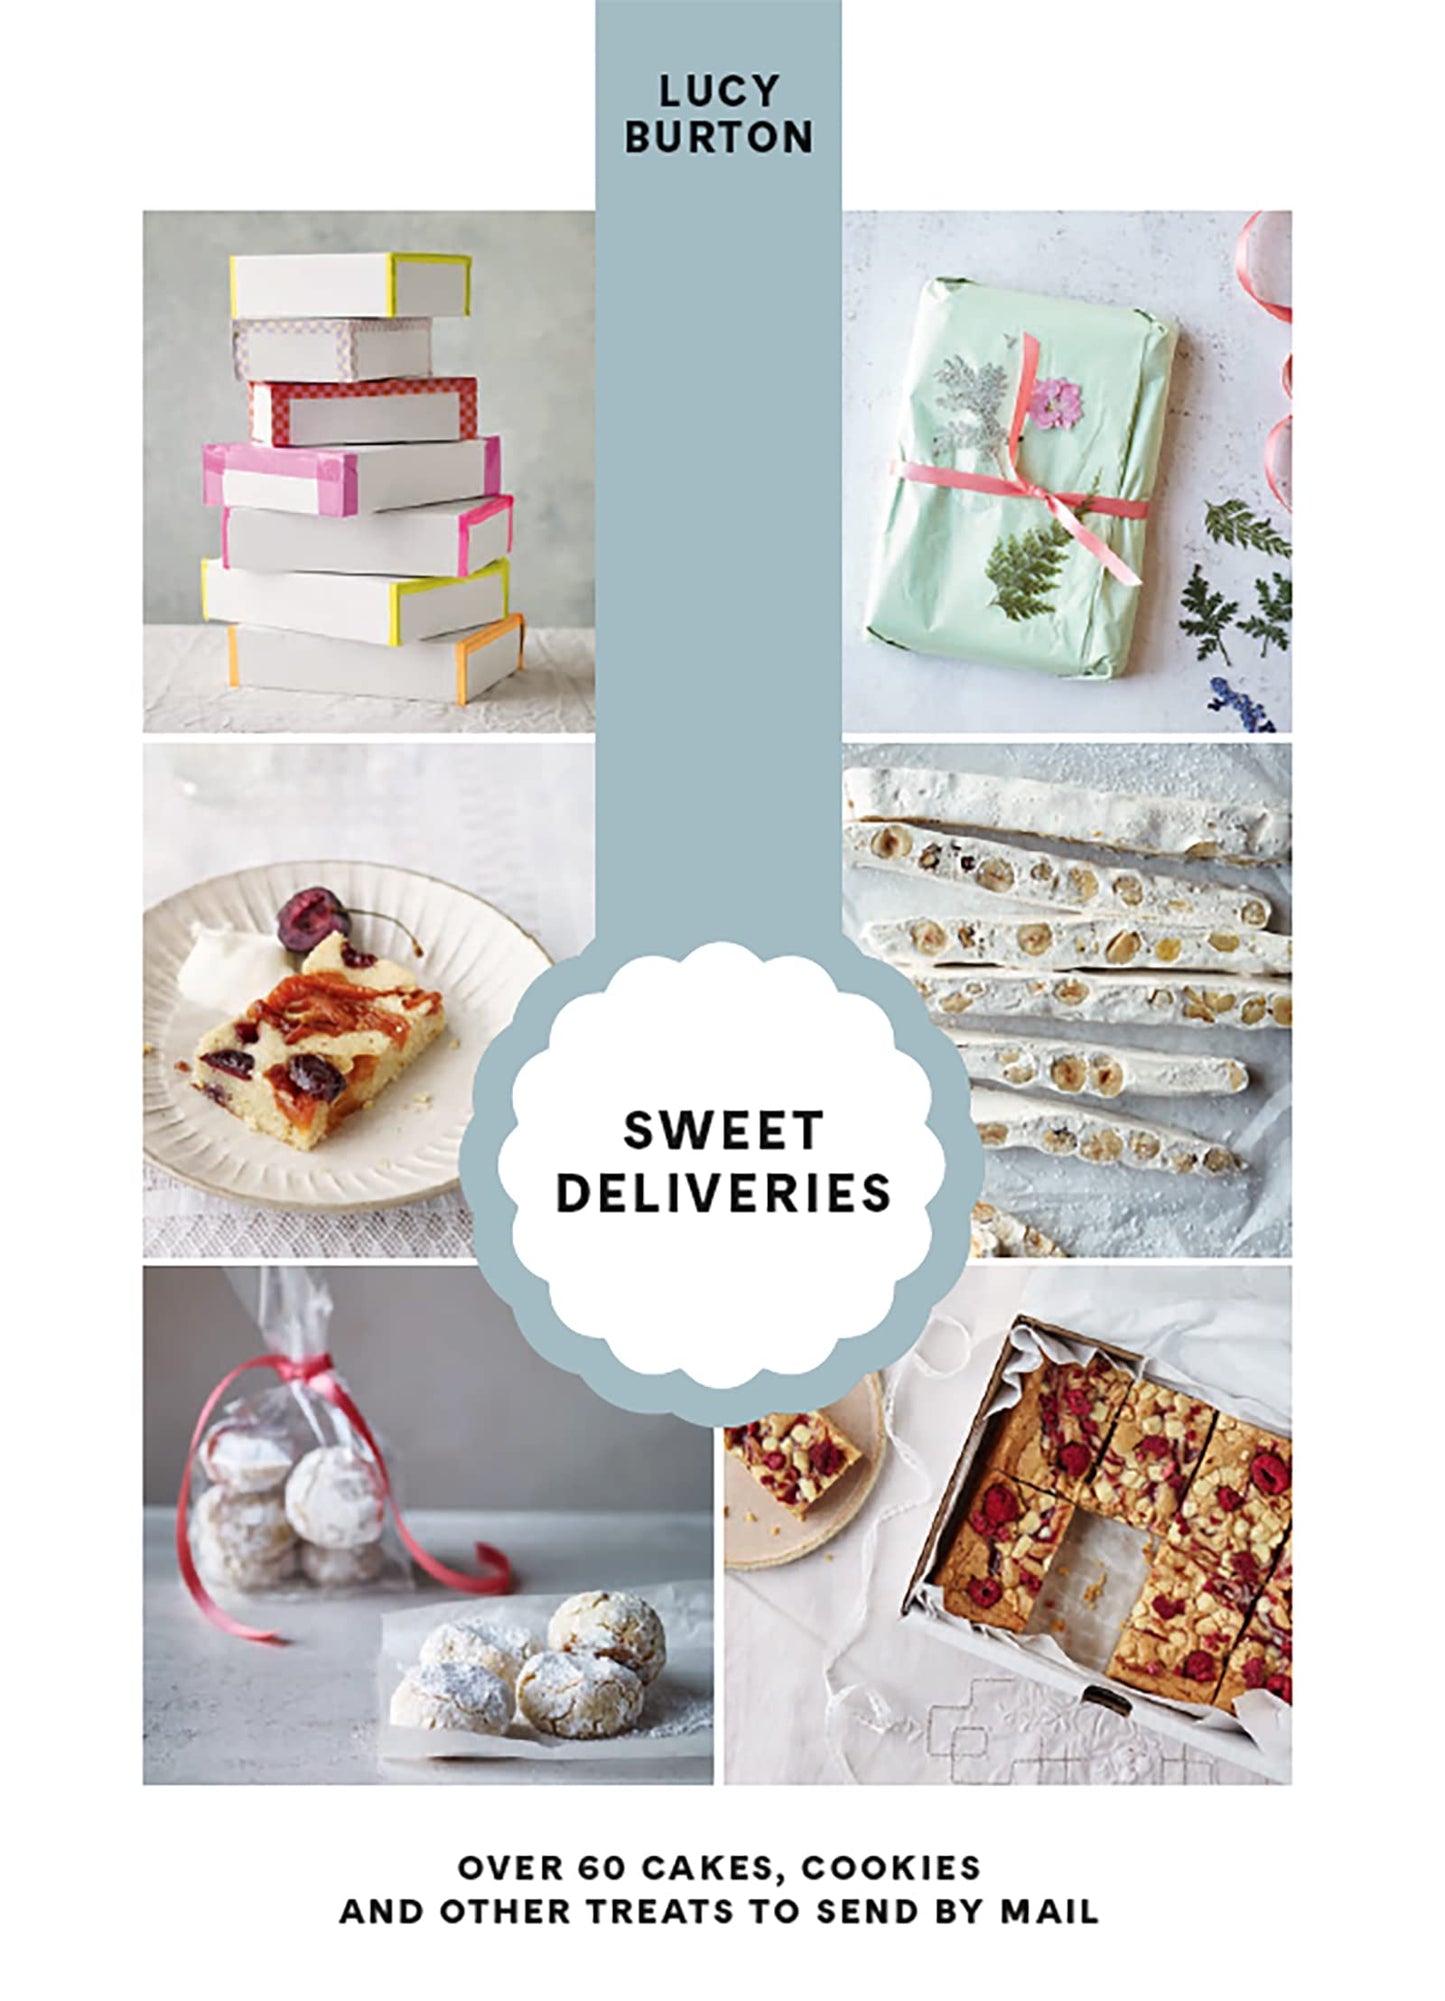 Sweet Deliveries: Over 50 cakes and sweet treats to post